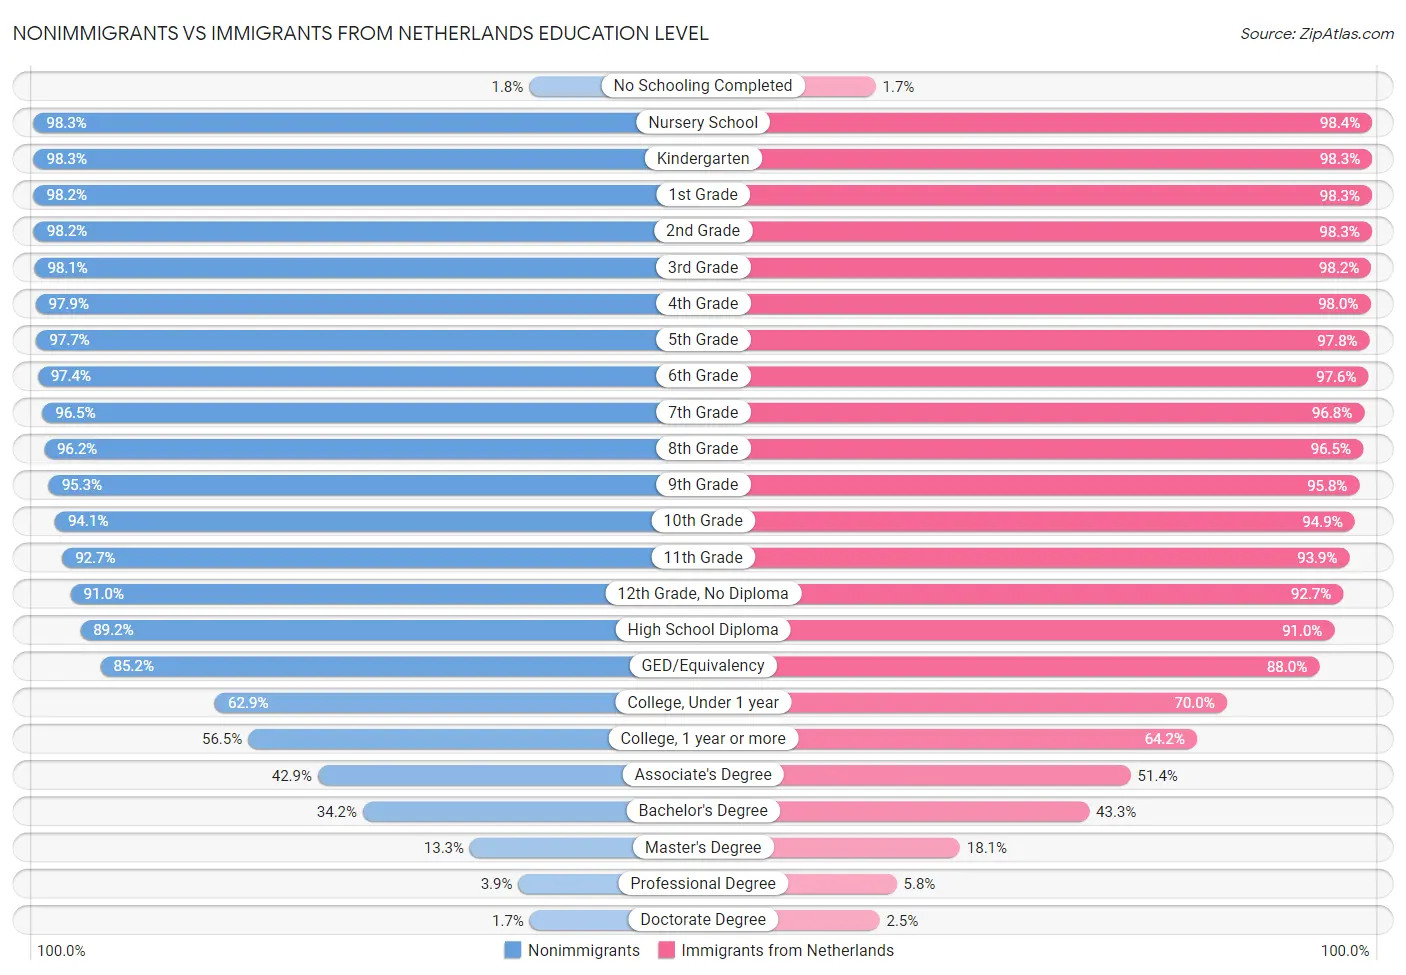 Nonimmigrants vs Immigrants from Netherlands Education Level